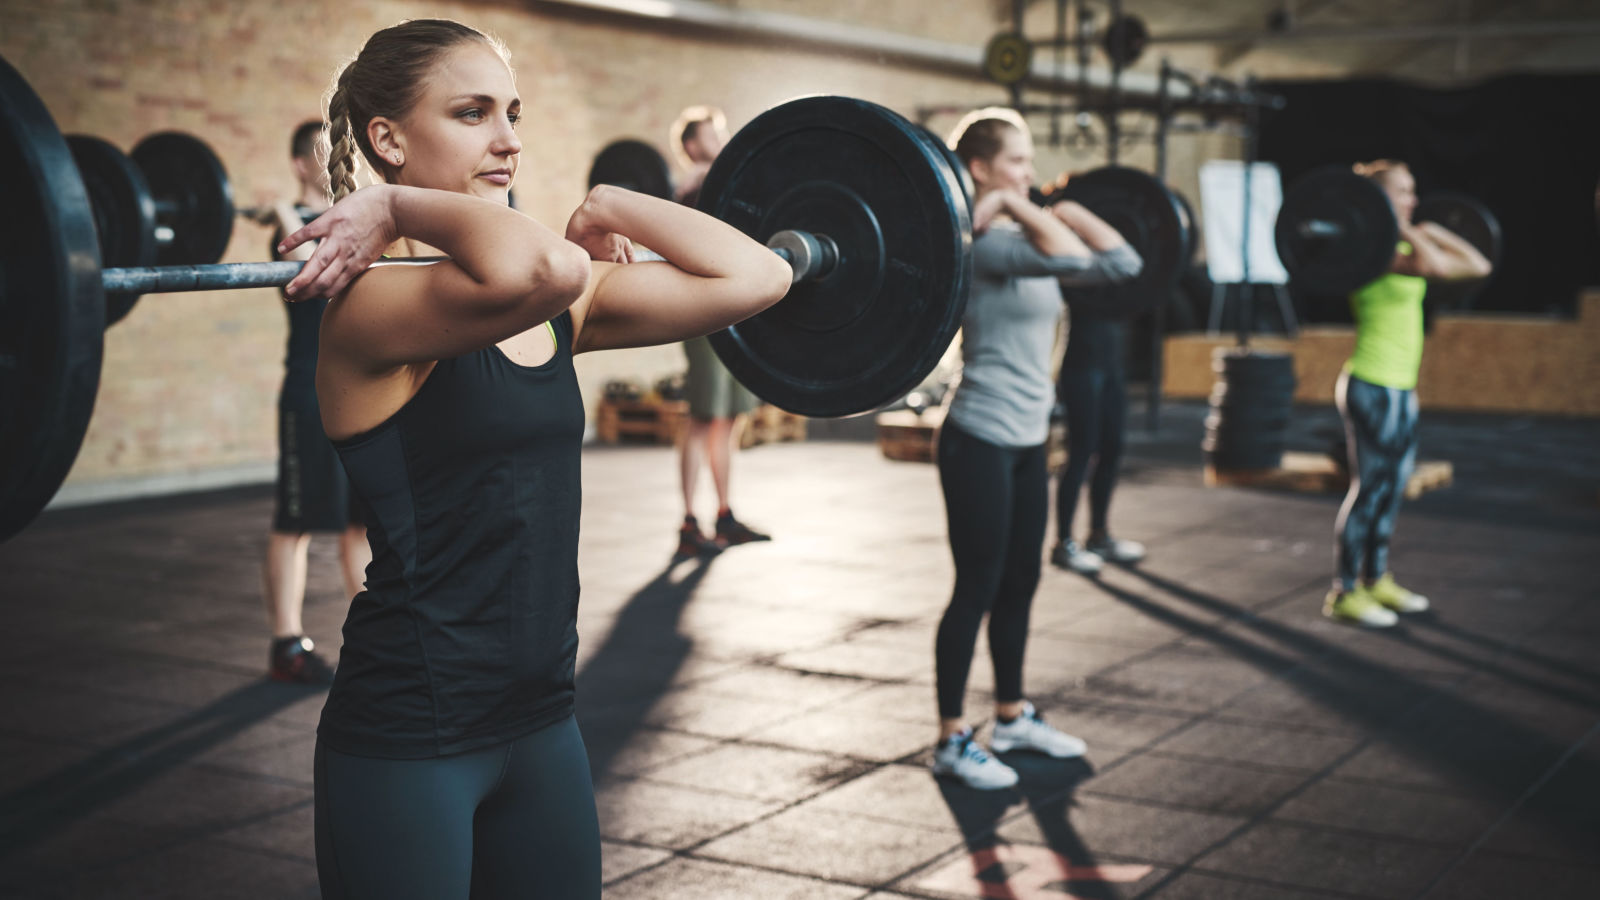 <p><span>Debunk common workout myths that might be sabotaging your progress. Get the facts straight with eye-opening truths to stay healthy. Challenge common fitness misconceptions and pull ahead of the crowd.</span></p>